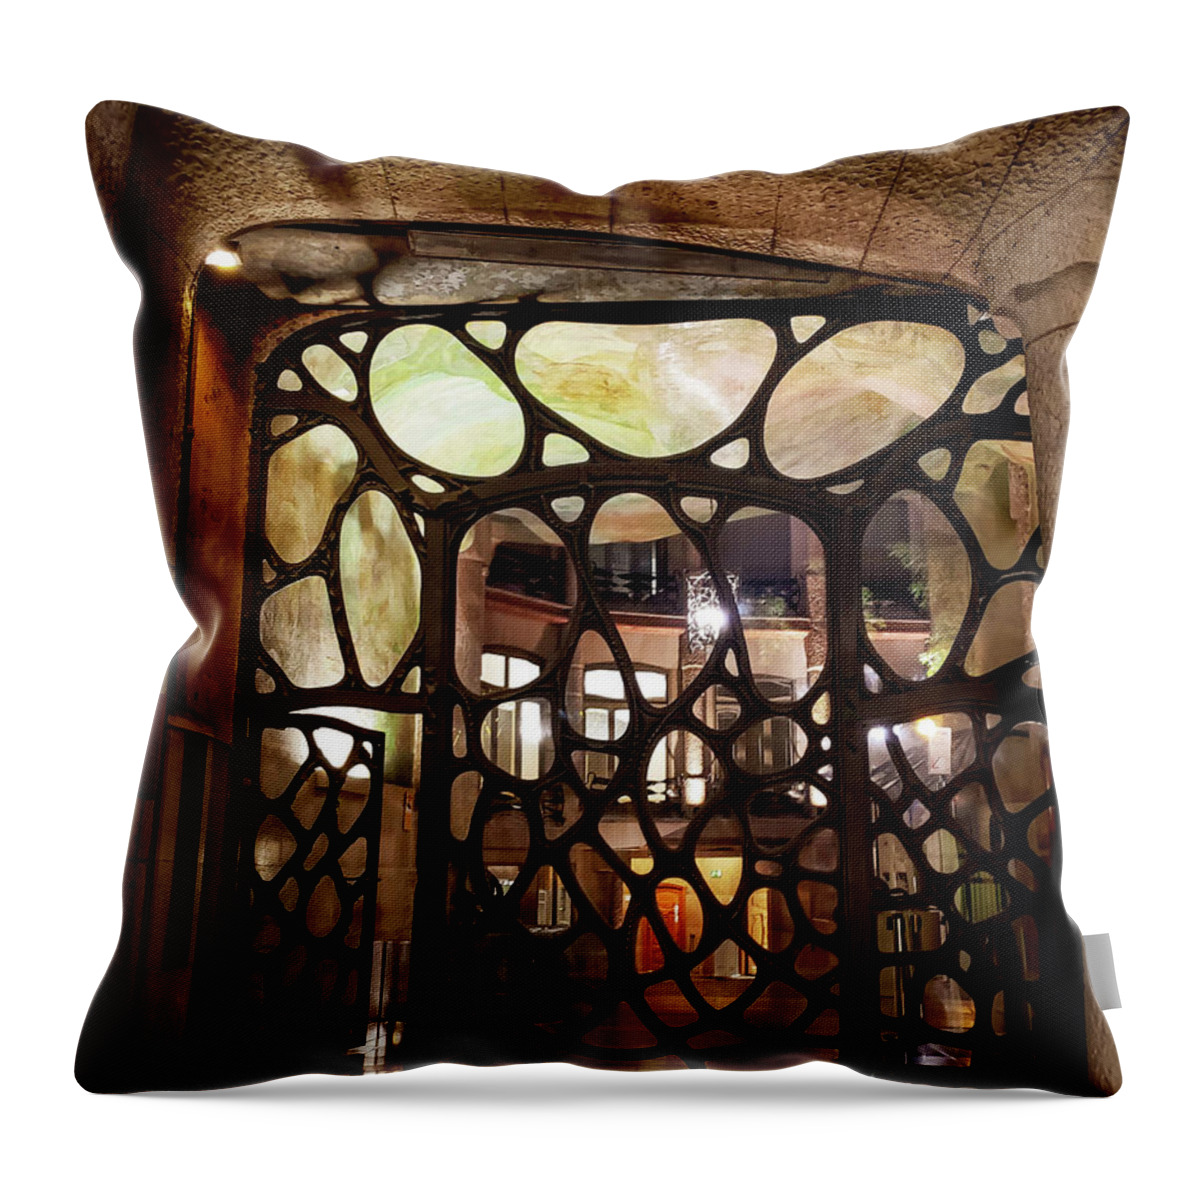 Casa Mila Throw Pillow featuring the photograph Doorway Casa Mila by Mary Capriole